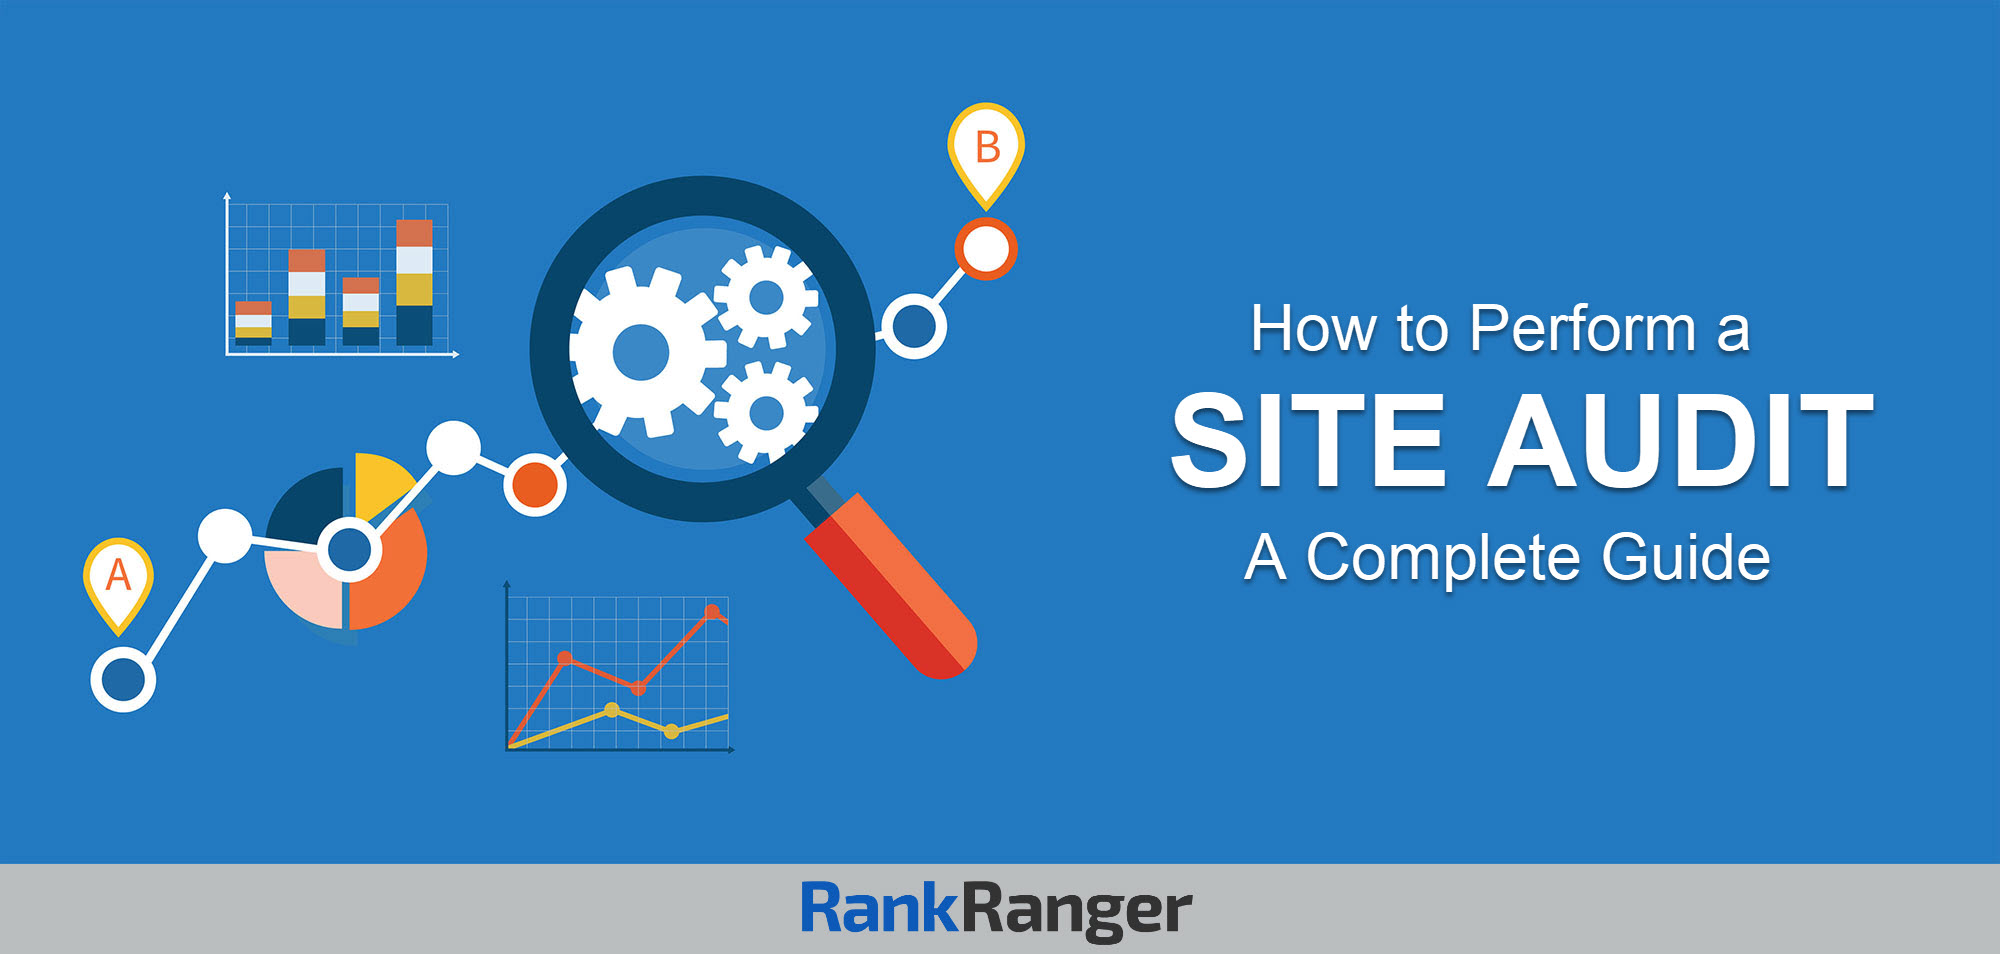 How to Perform a Site Audit: A Complete Guide